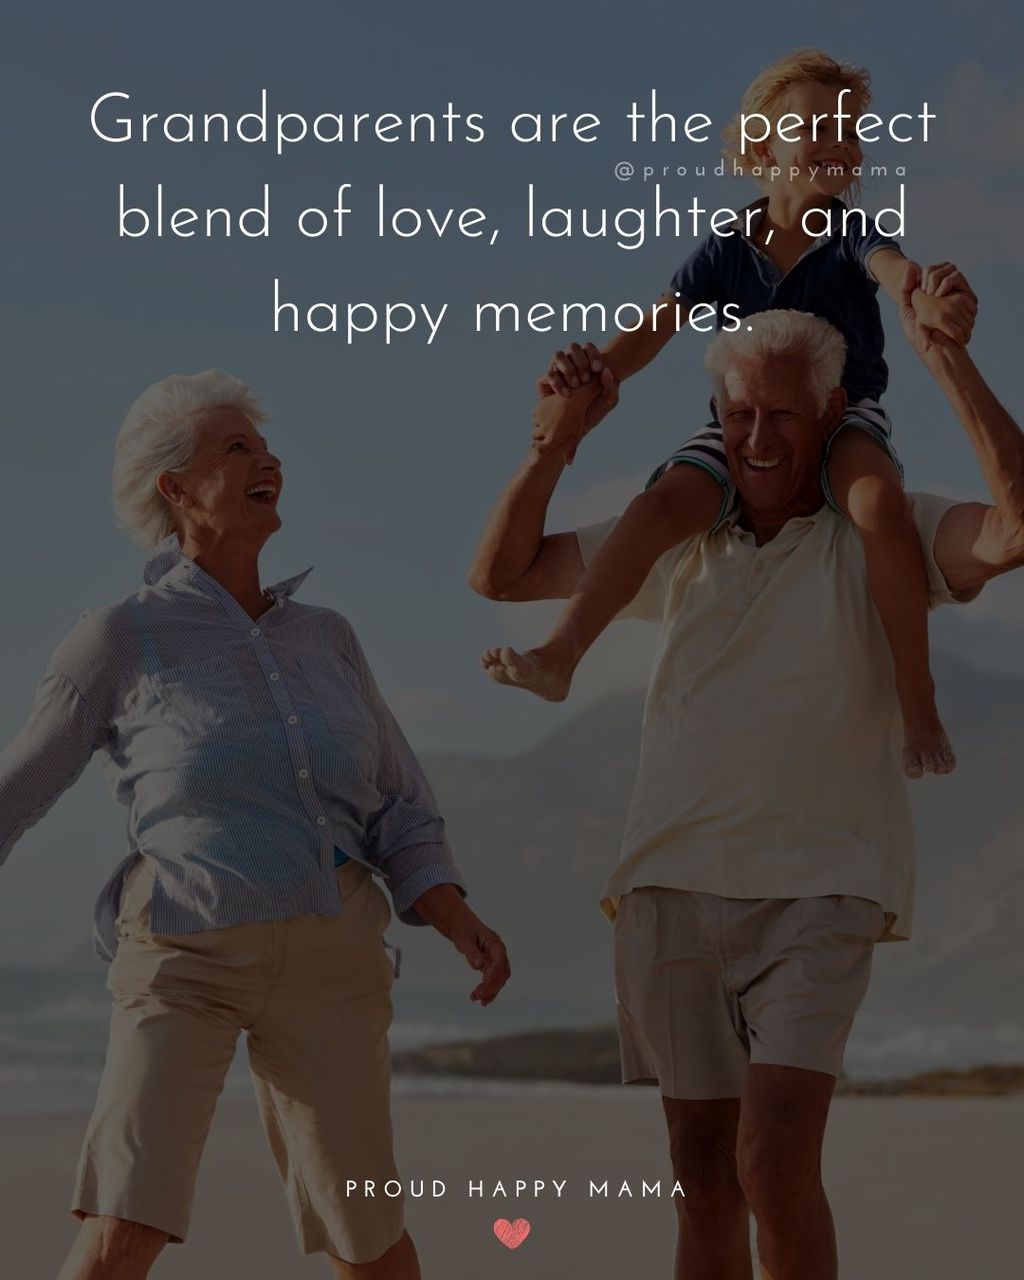 Grandparent Inspirational Quotes | Grandparents are the perfect blend of love, laughter, and happy memories.